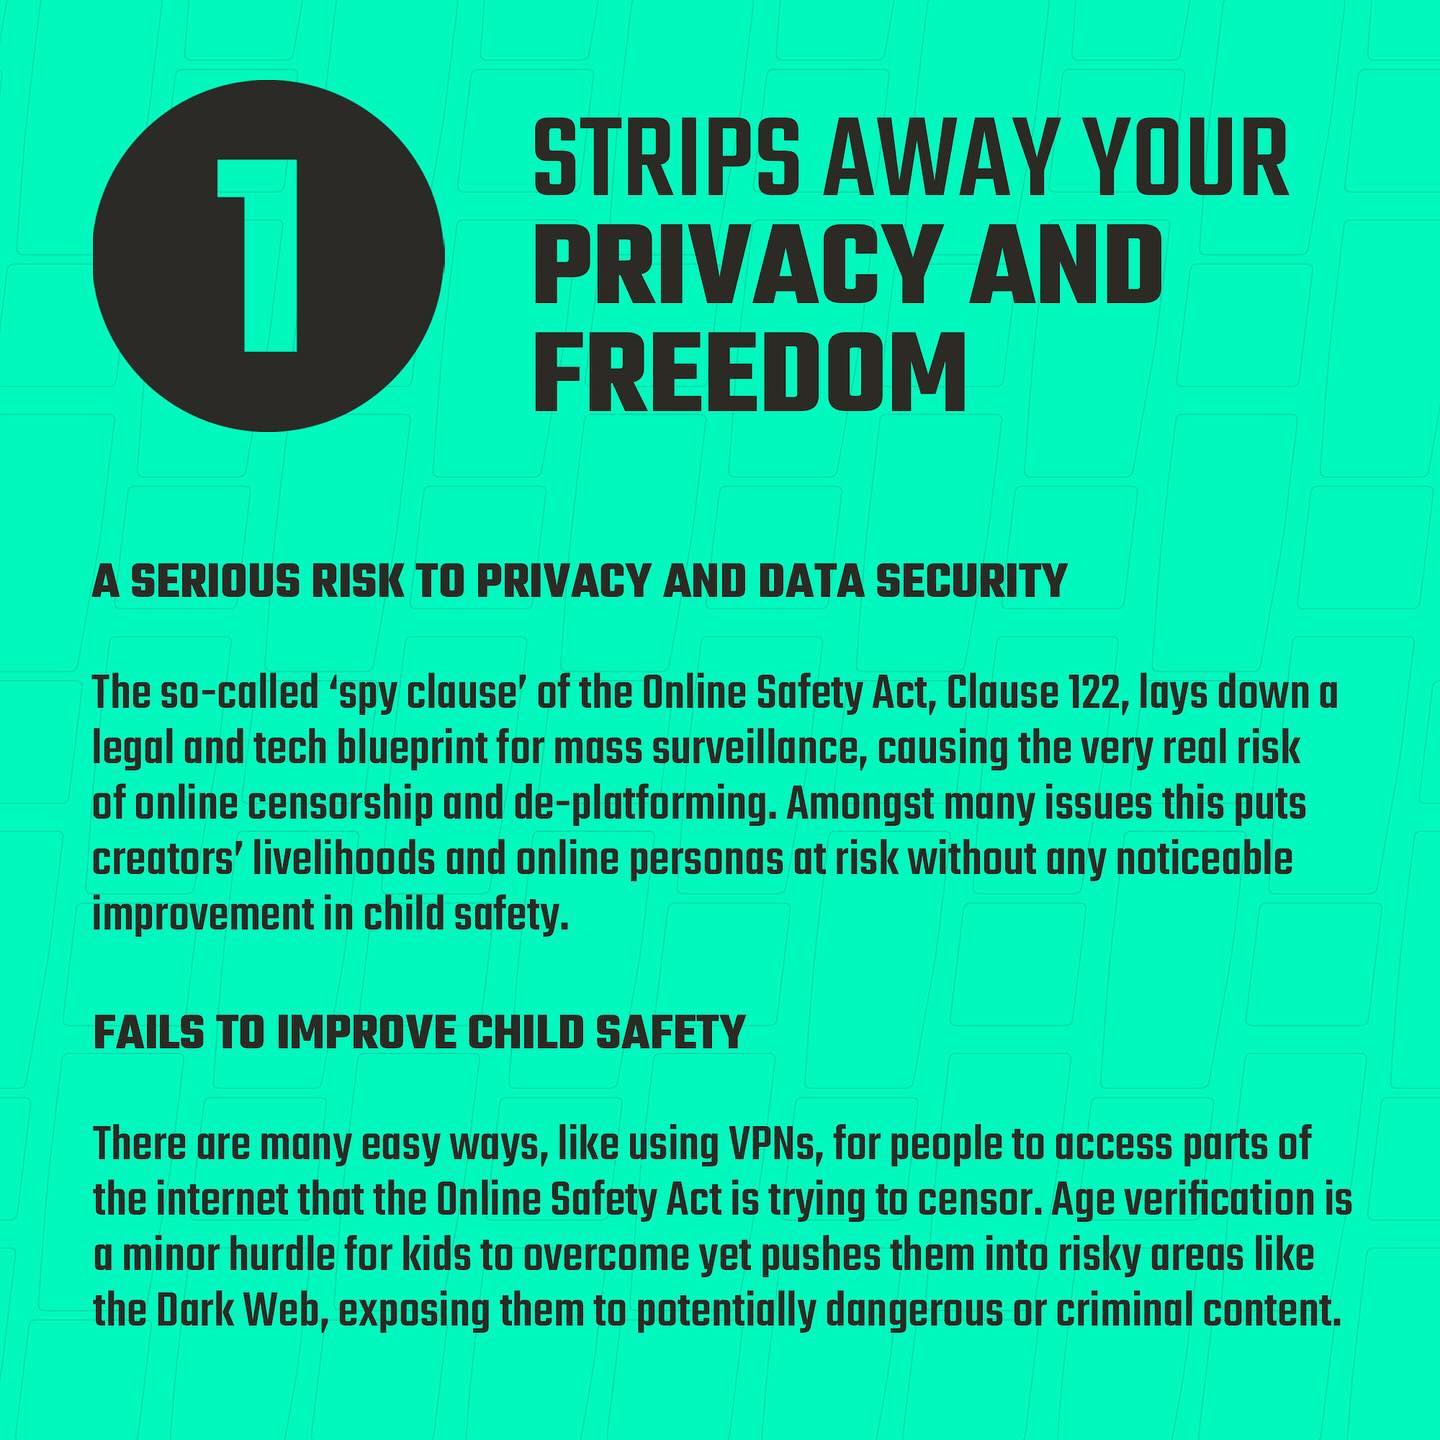 ATTENTION QUEERS, HOES & FANS 🚨The UK government is targeting our privacy, freedom and ability to engage in adult activities online 🚨 There’s a number of simple and effective things we can do to help stop it 👉🏻 sacktheact.org 👈🏻

This is not just going to go away. Get. Involved. 🙏🏻 #OnlineSafetyAct #SackTheAct